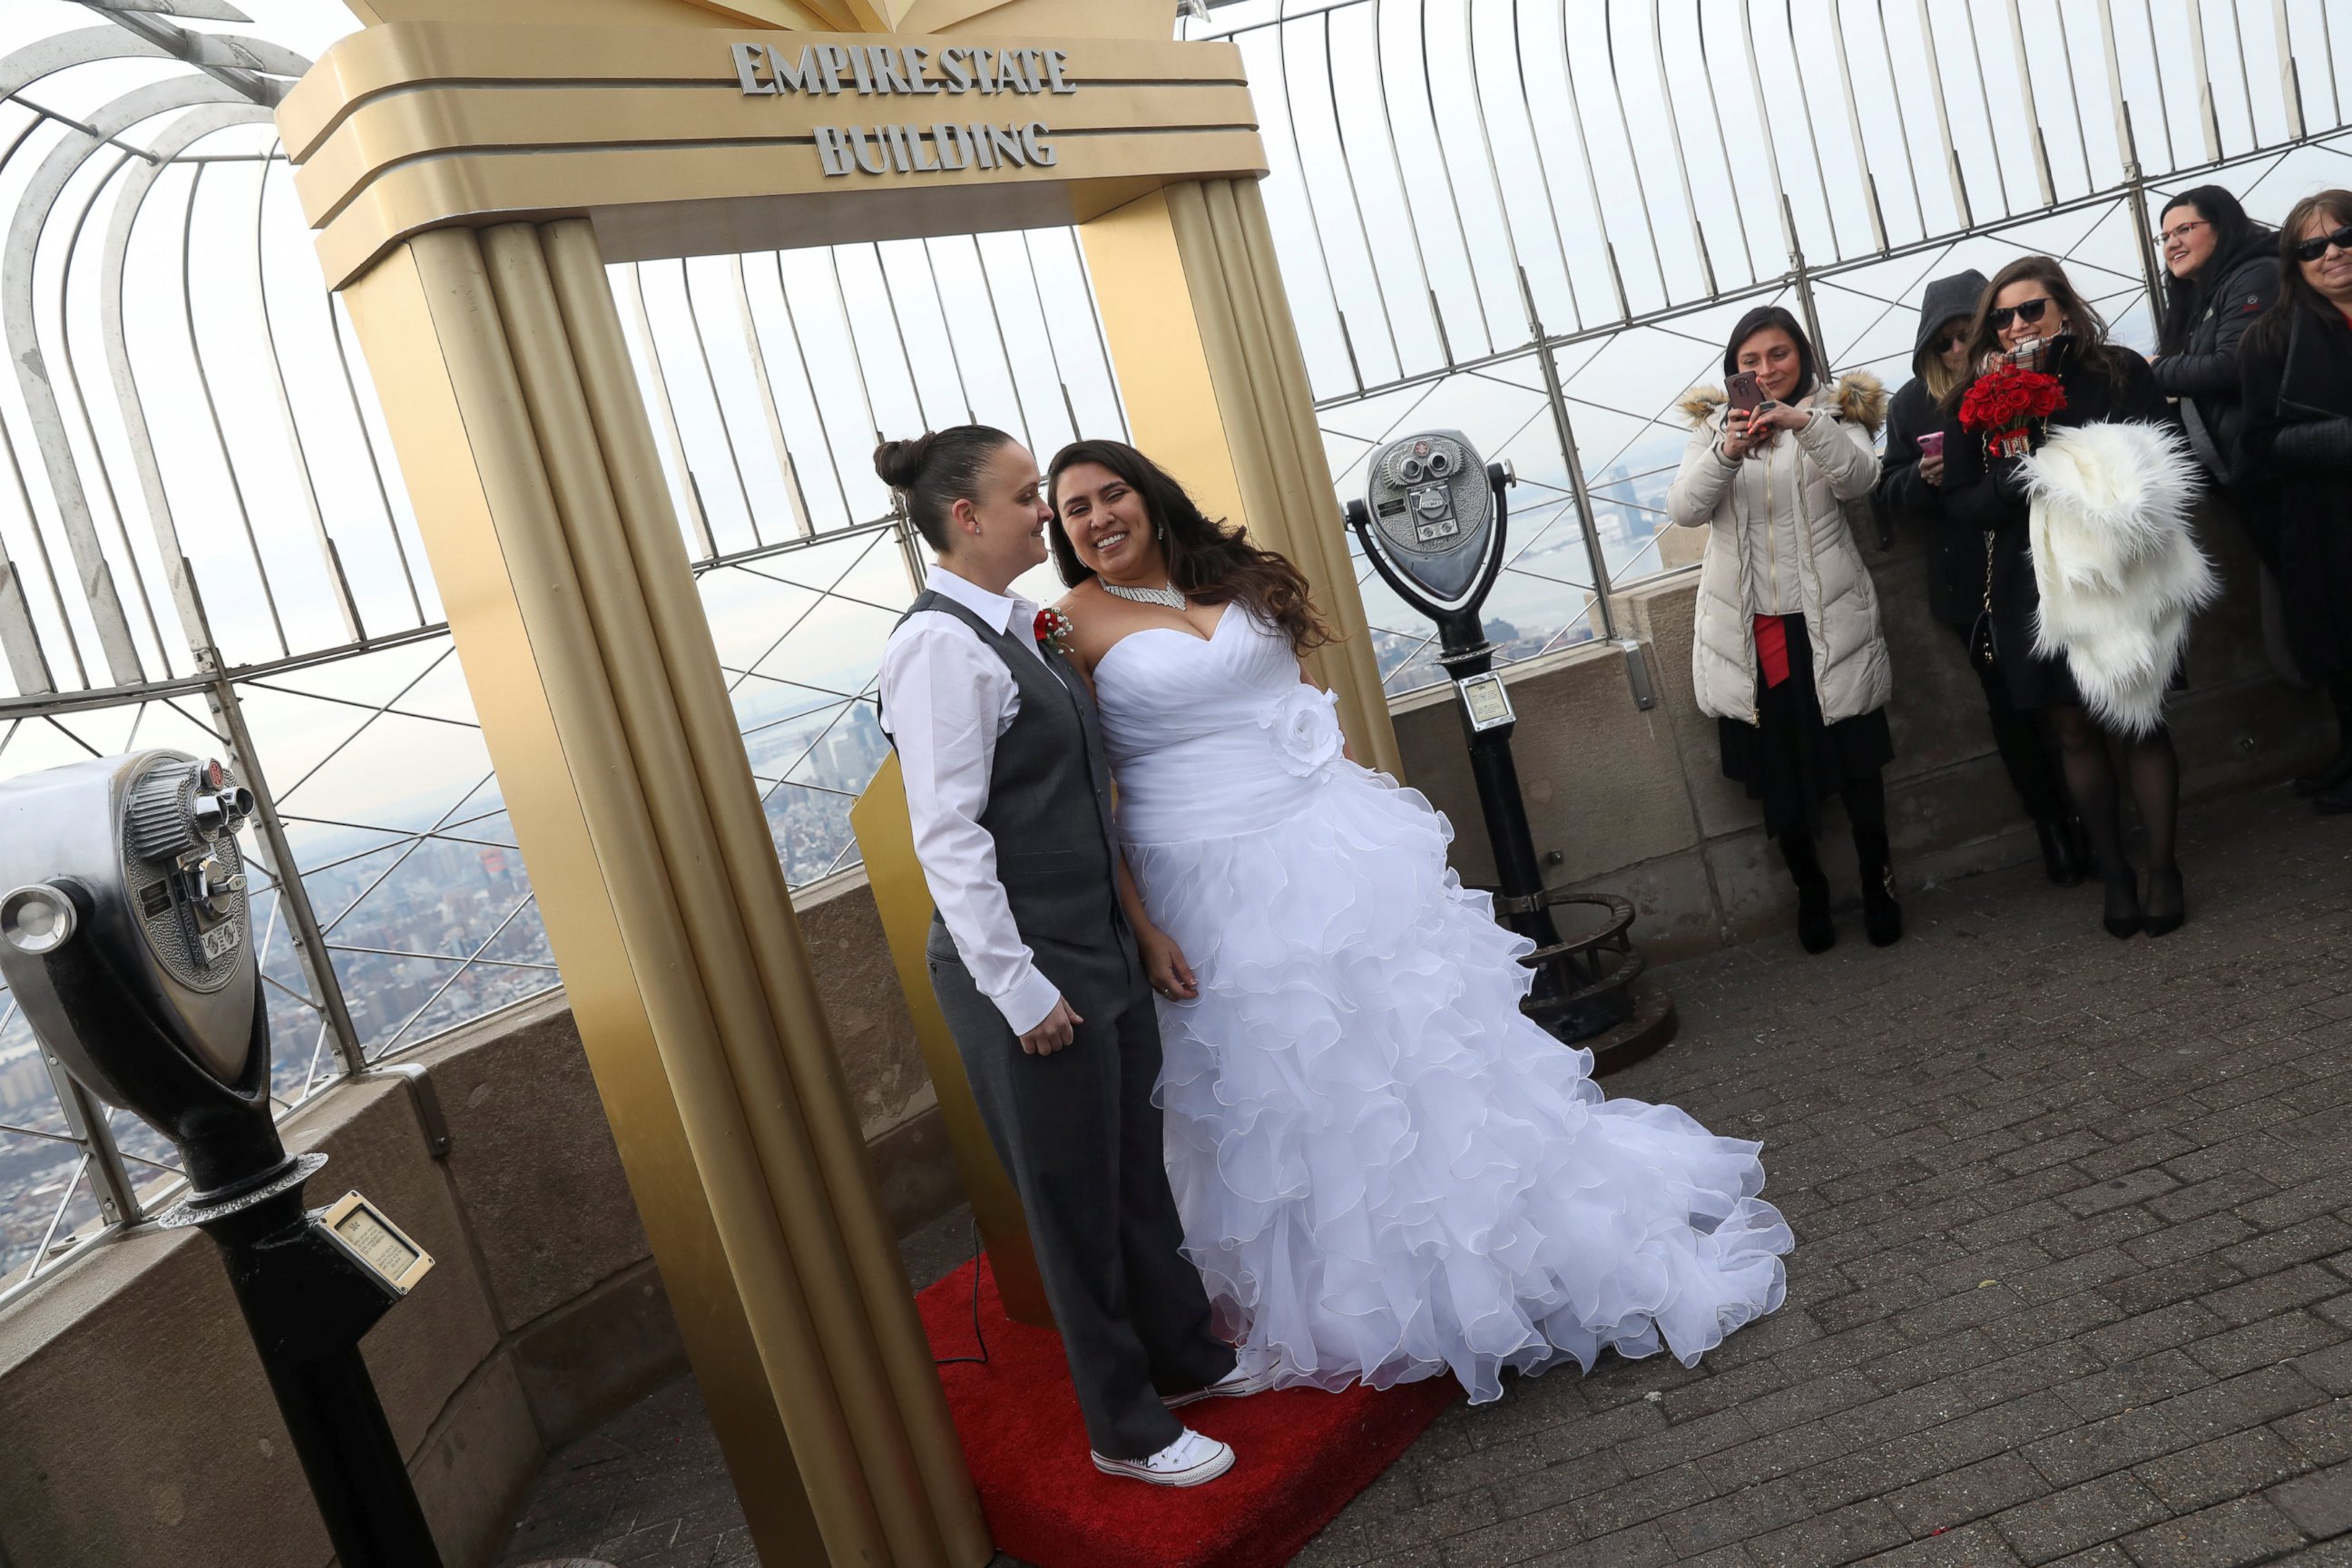 PHOTO: Krista Owens and Danielle Reno smile after exchanging vows at their Valentine's Day wedding ceremony on top of the Empire State Building in New York, Feb. 14, 2017.